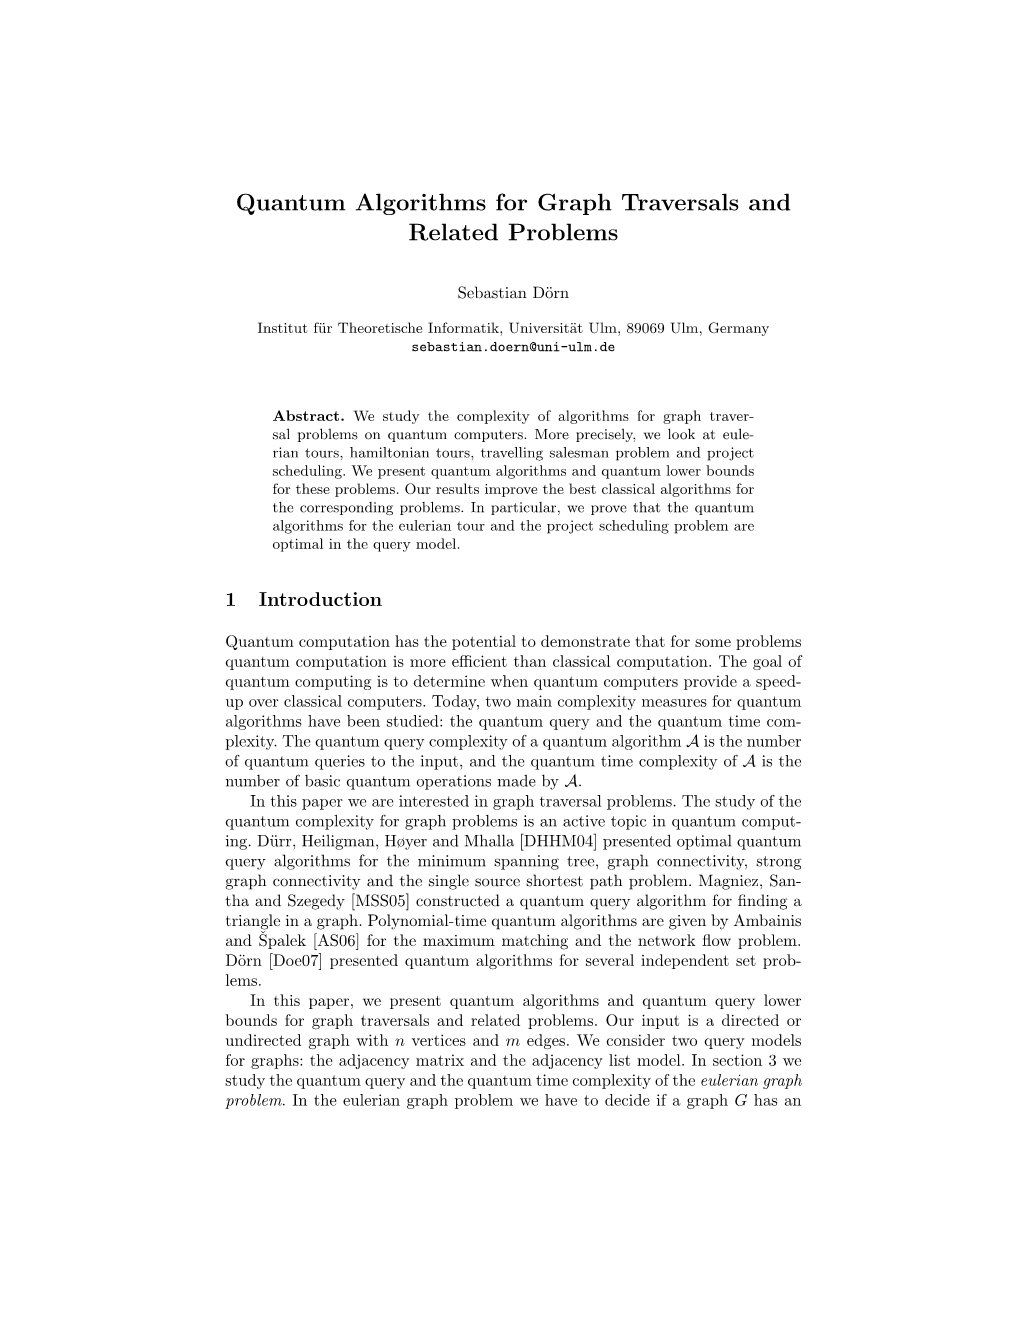 Quantum Algorithms for Graph Traversals and Related Problems